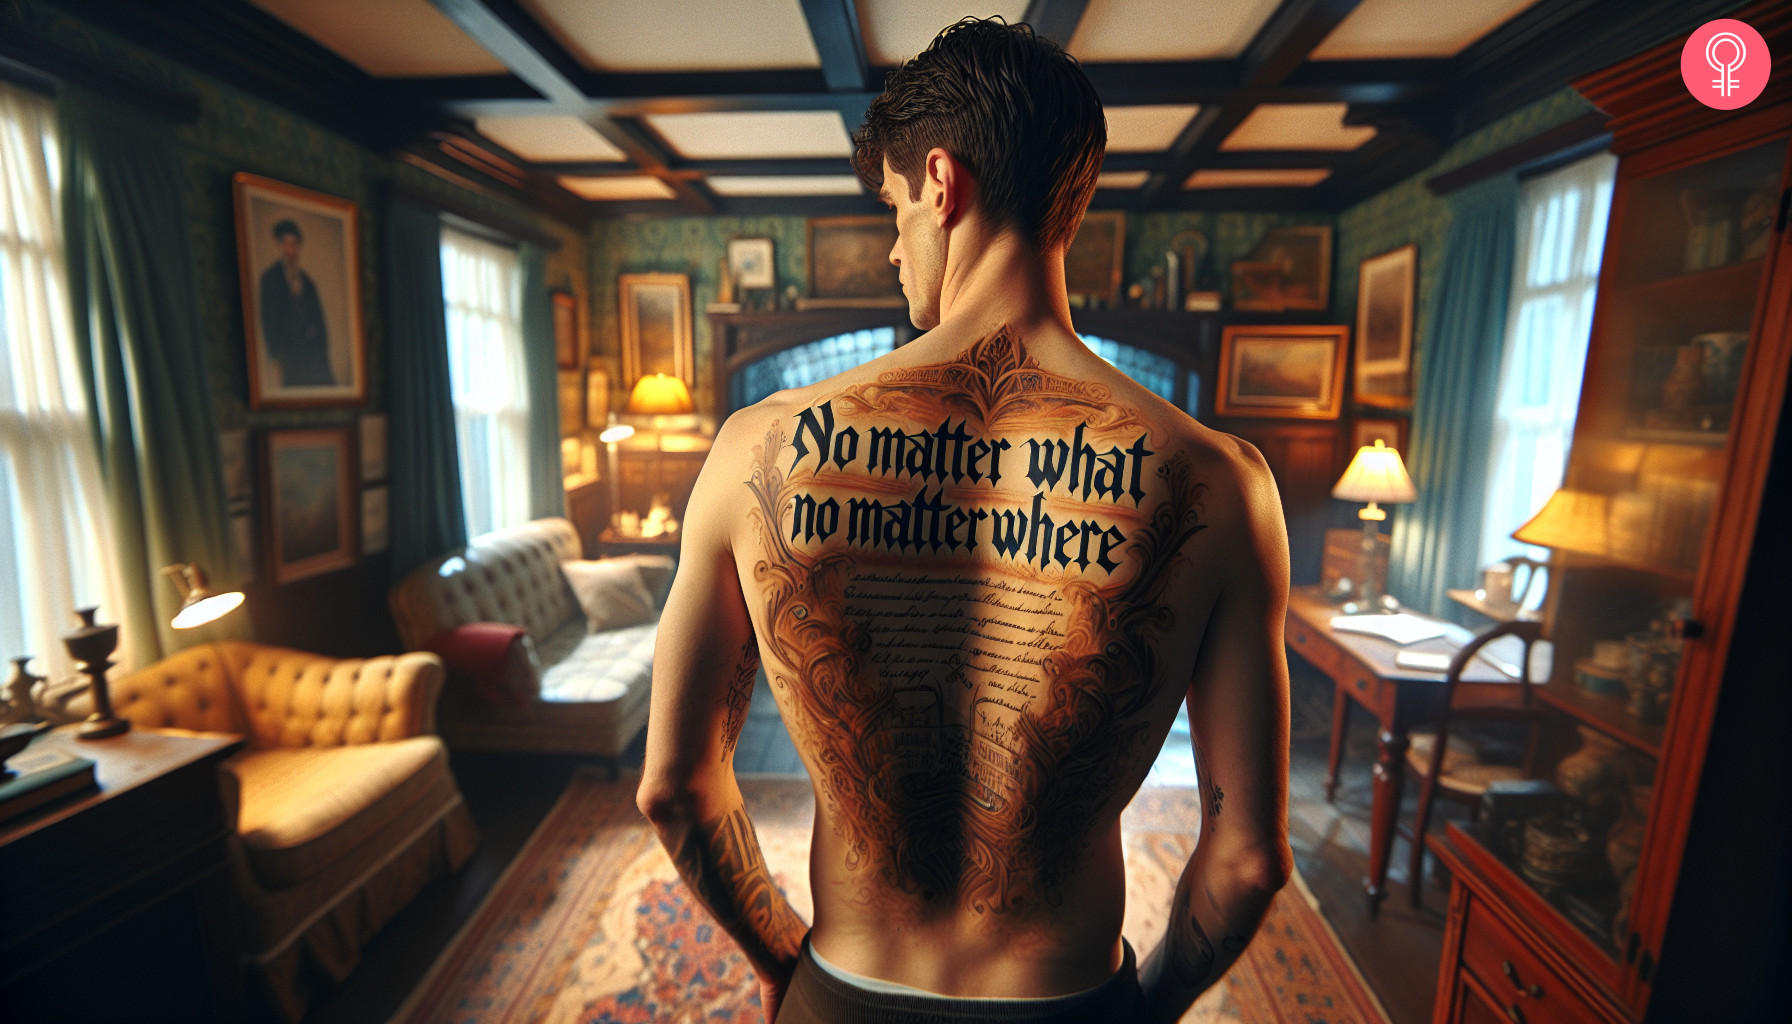 ‘No matter what’ no matter where tattoo on the back of a man